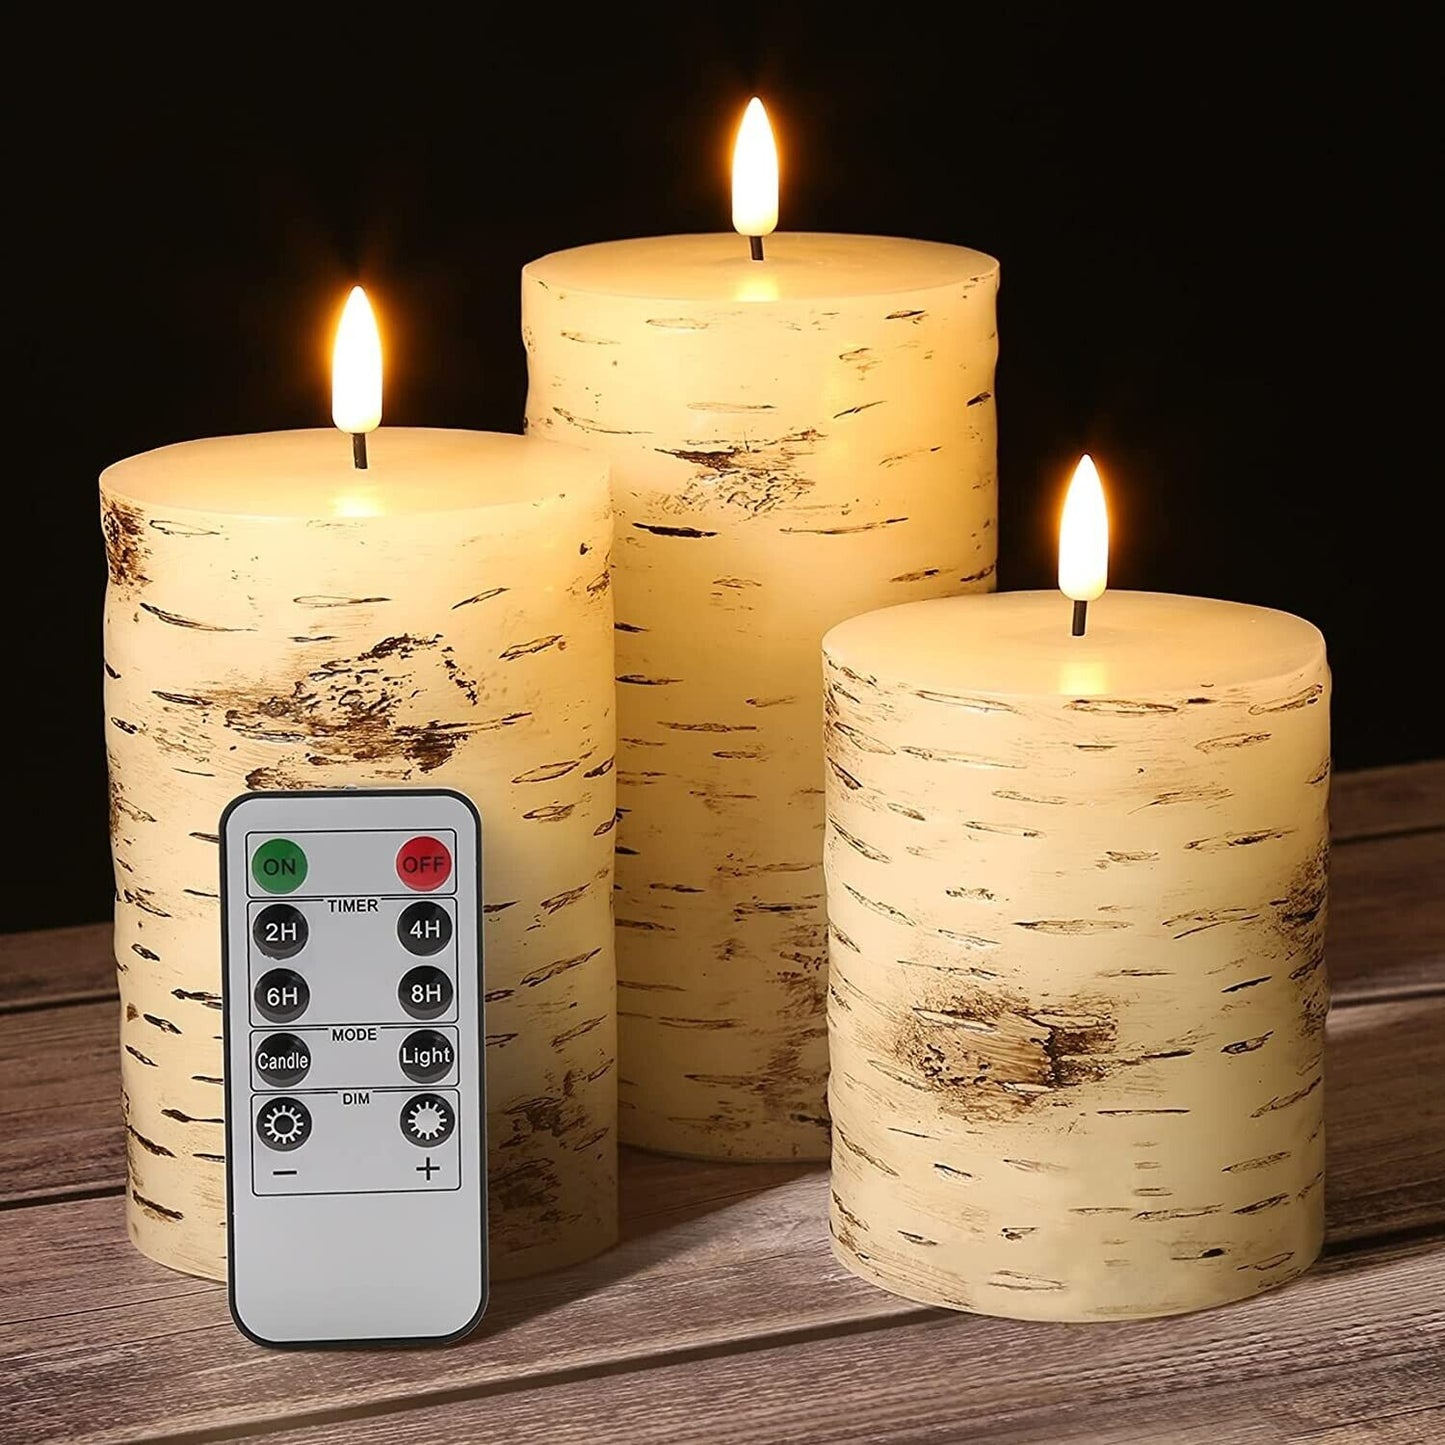 Eywamage Grey Glass Flameless Candles with Remote Battery Operated  Flickering LED Pillar Candles Real Wax Wick Φ 3 H 4 5 6